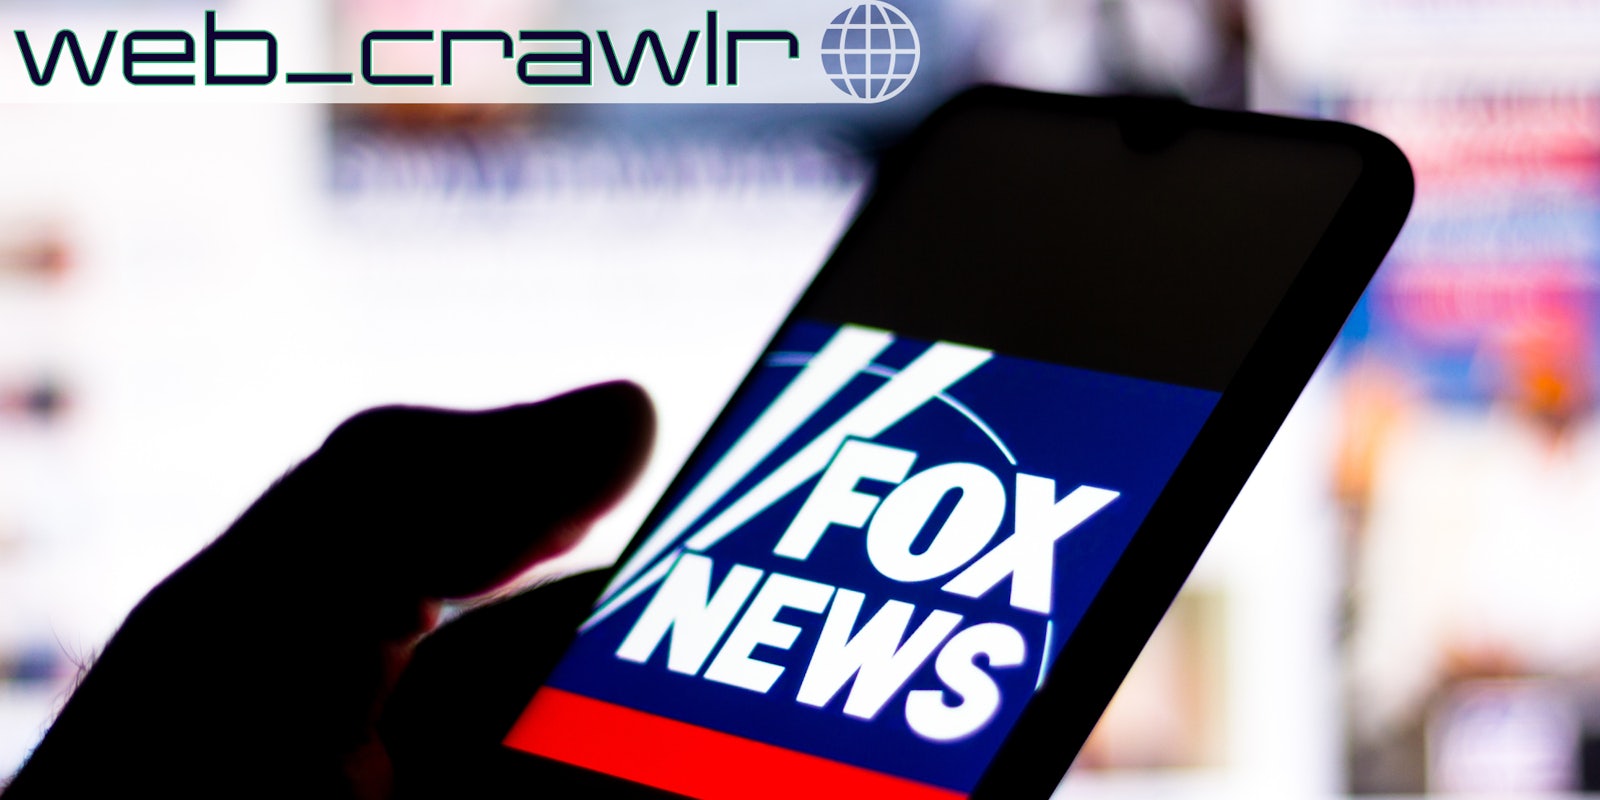 A phone with the Fox News logo on it. The Daily Dot newsletter web_crawlr logo is in the top left corner.